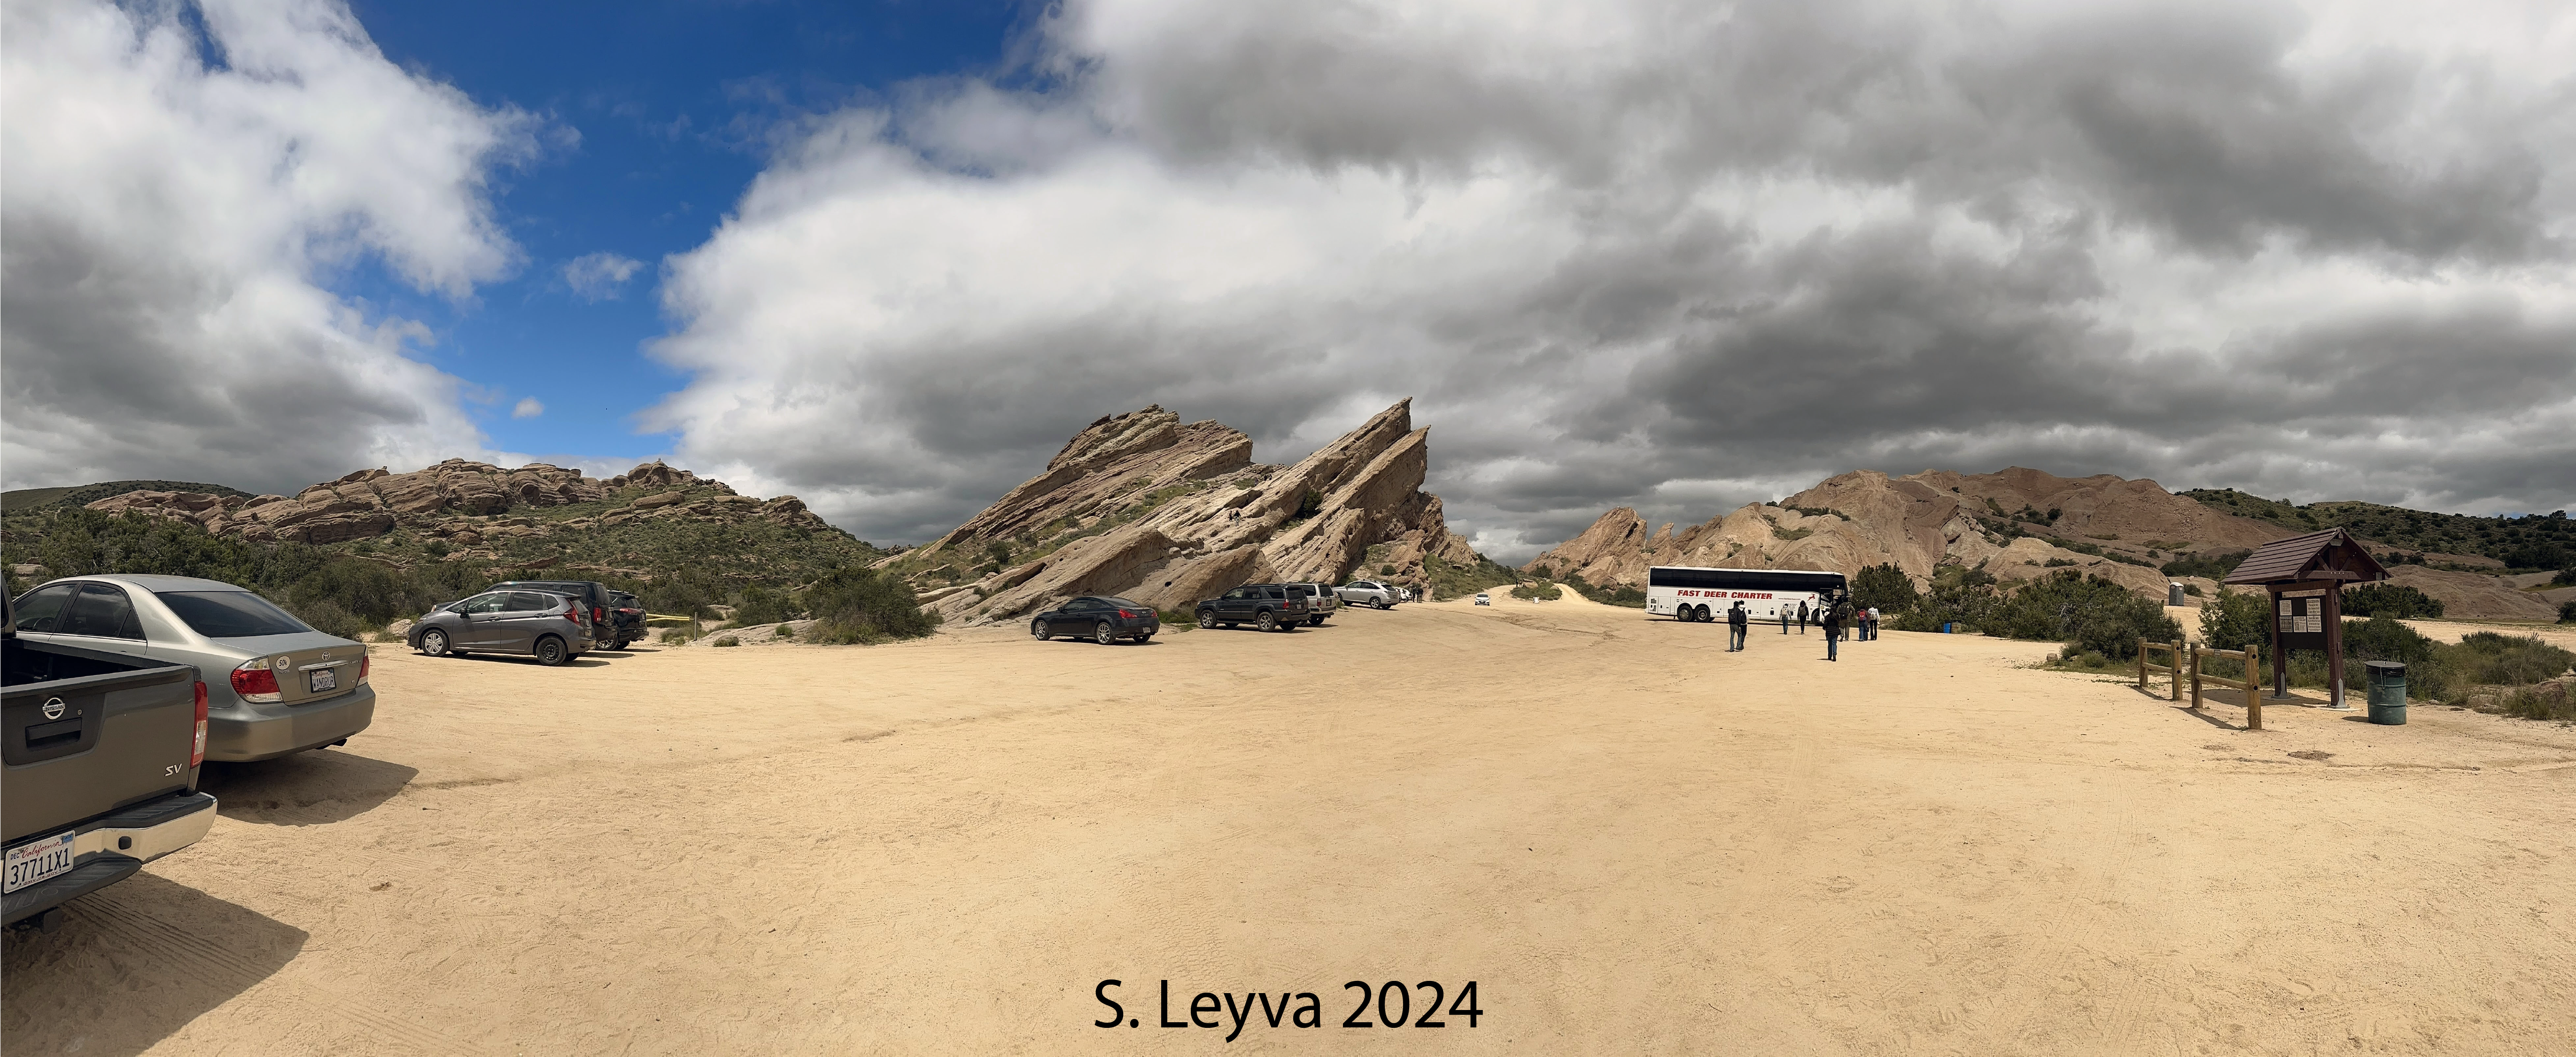 Panoramic view of the tilted rocks exposed in Vasquez Rocks Natural Area.